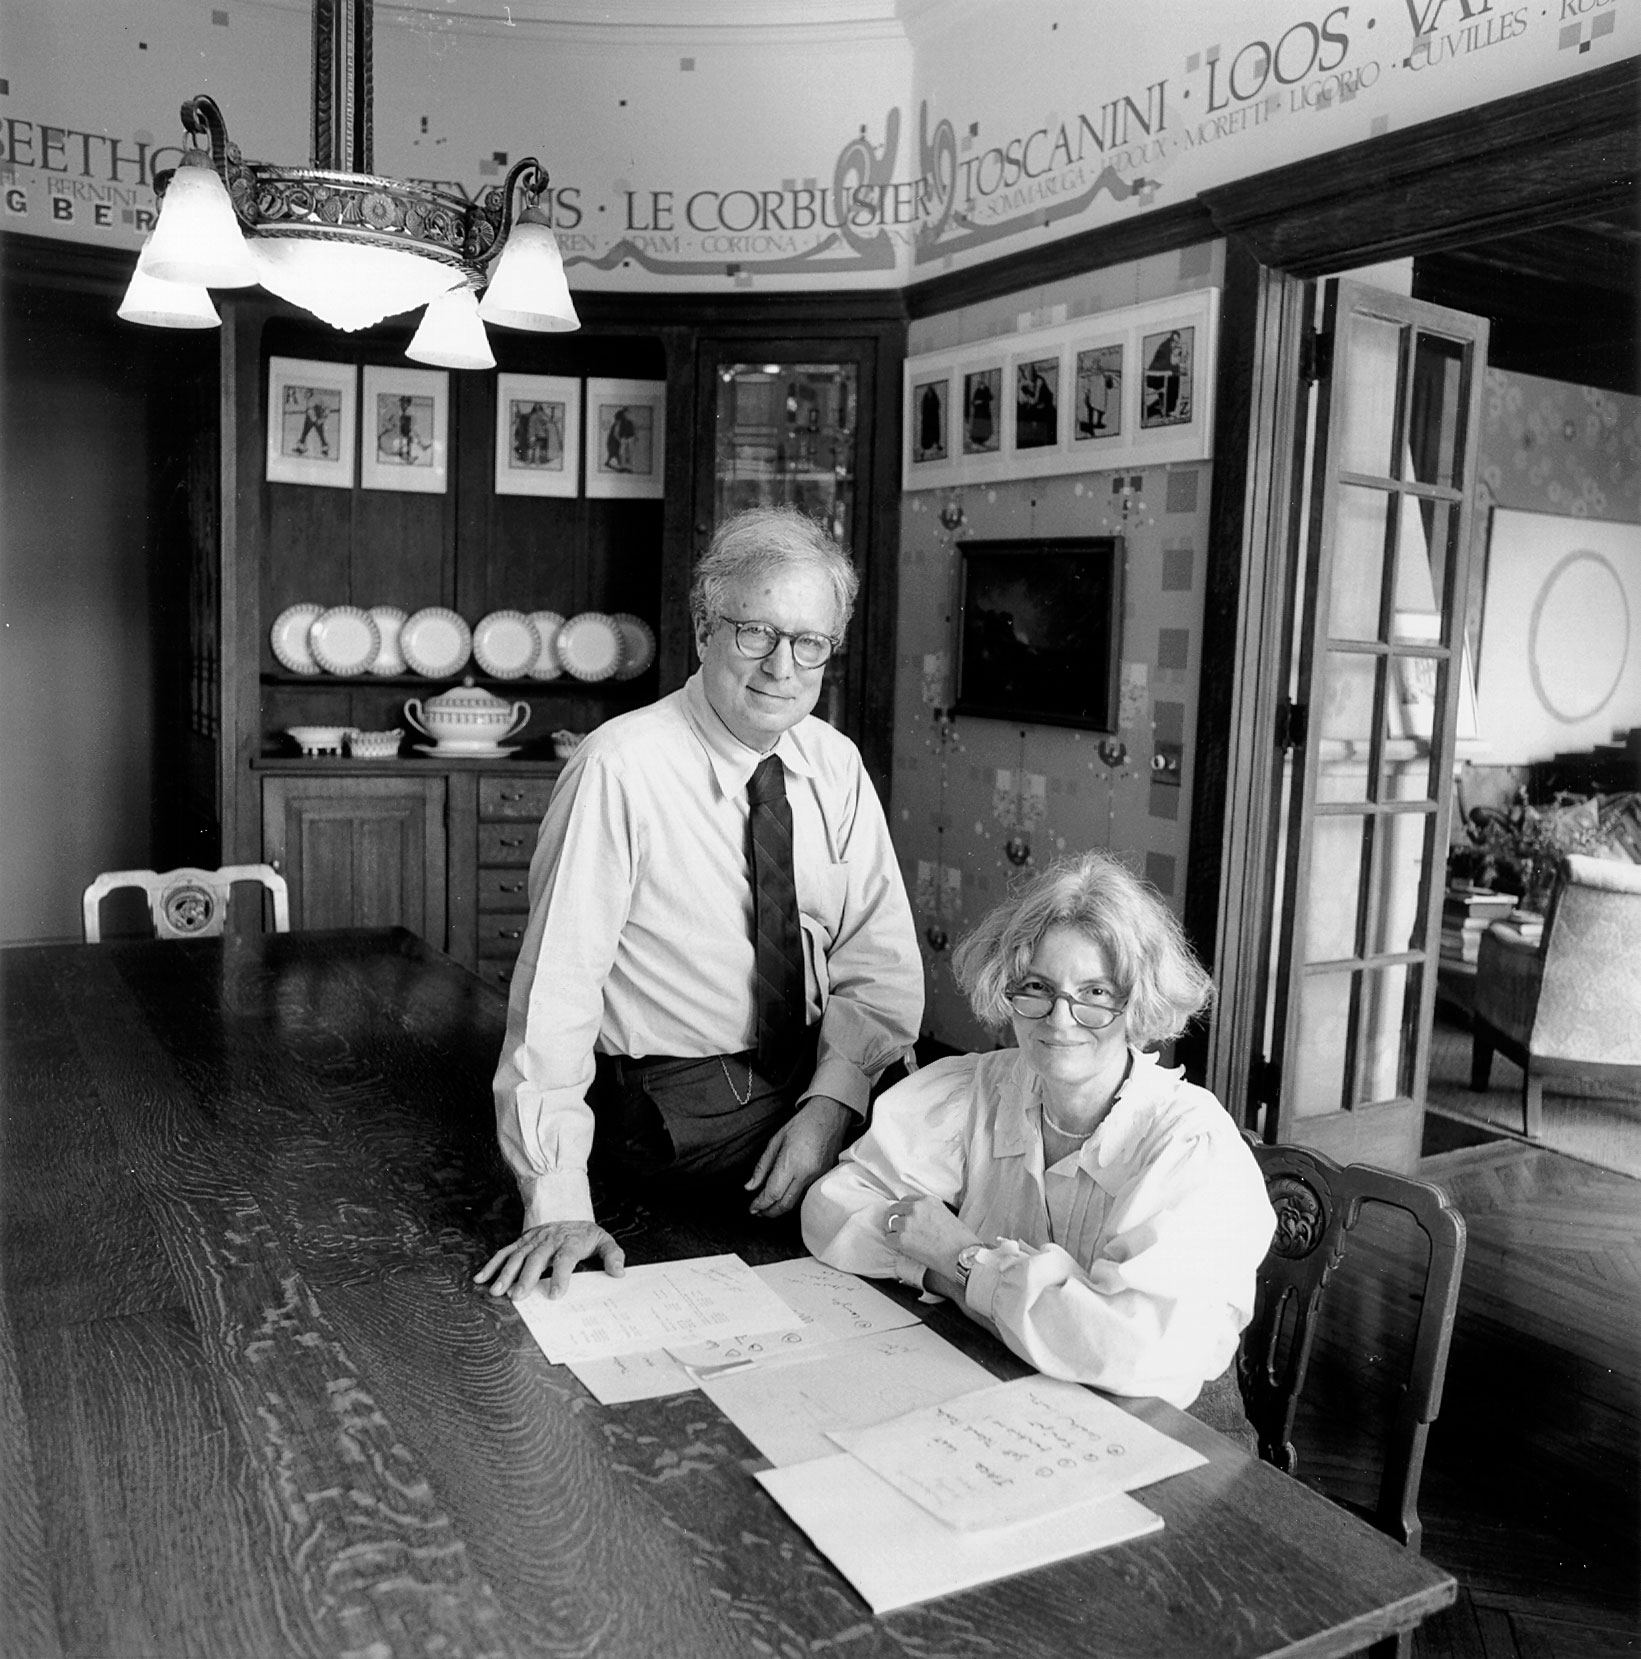 Blakc and white photo of man and woman at dining room table